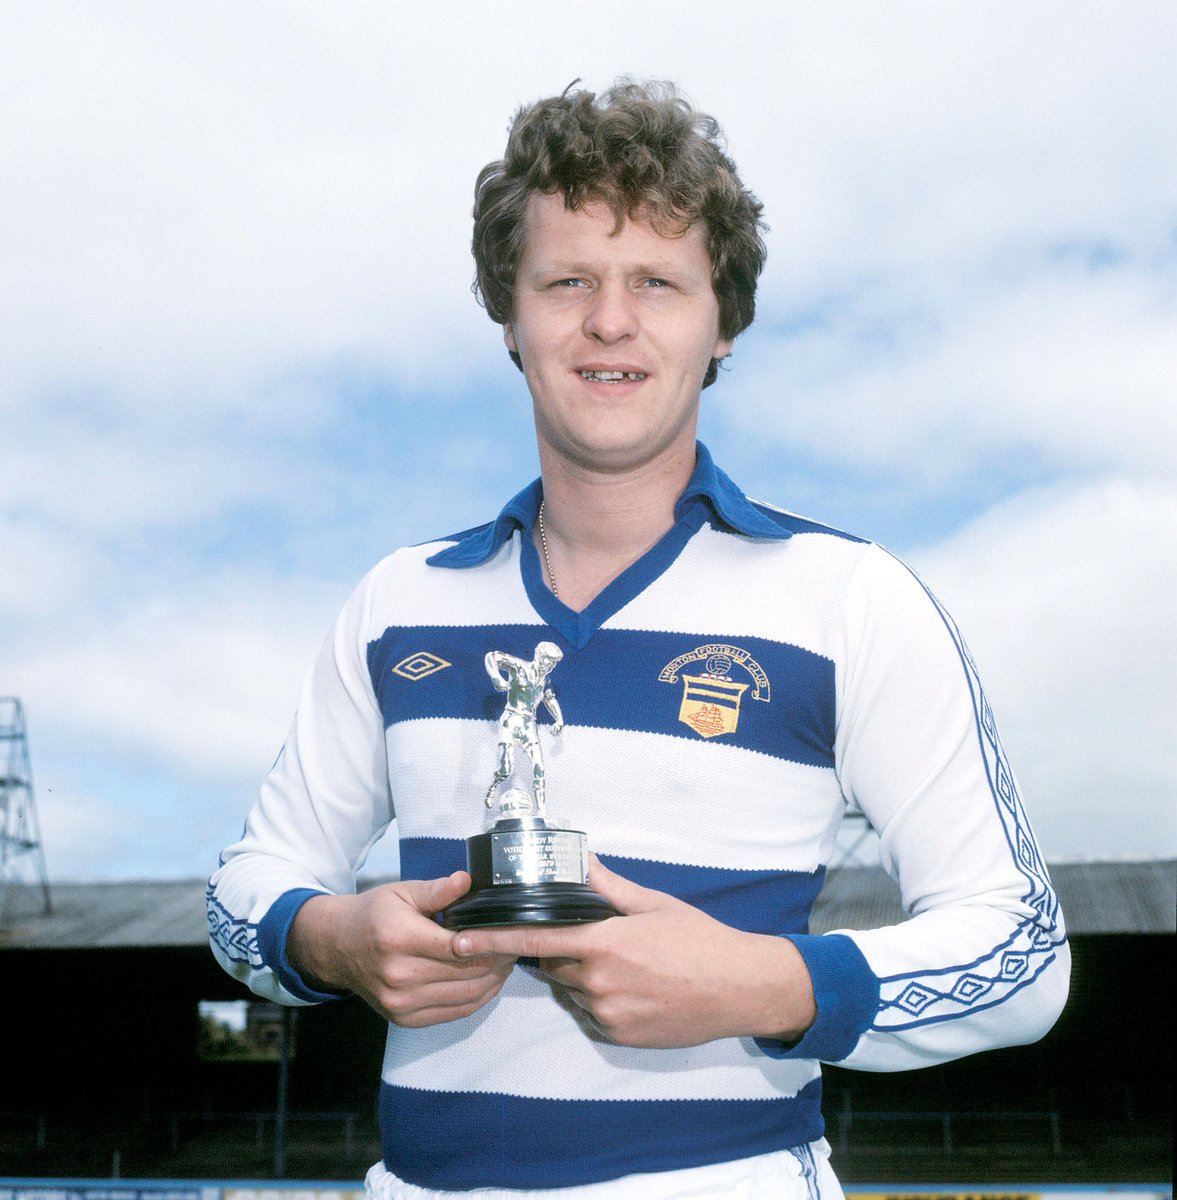 Andy Ritchie with his player of the year award in 1979 @mooneyleon @Chrismcnulty75